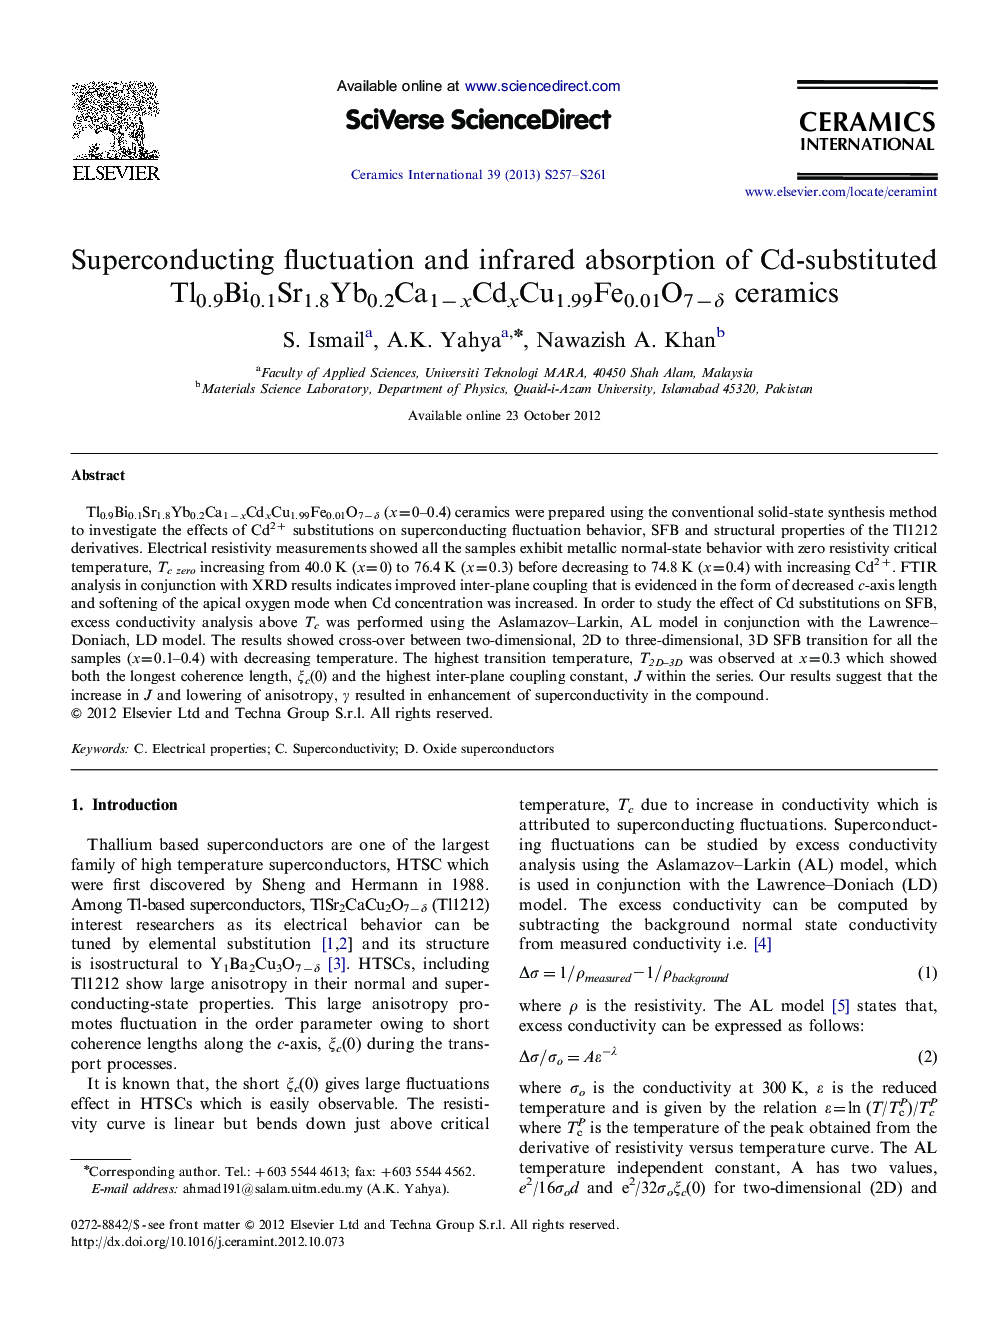 Superconducting fluctuation and infrared absorption of Cd-substituted Tl0.9Bi0.1Sr1.8Yb0.2Ca1−xCdxCu1.99Fe0.01O7−δ ceramics